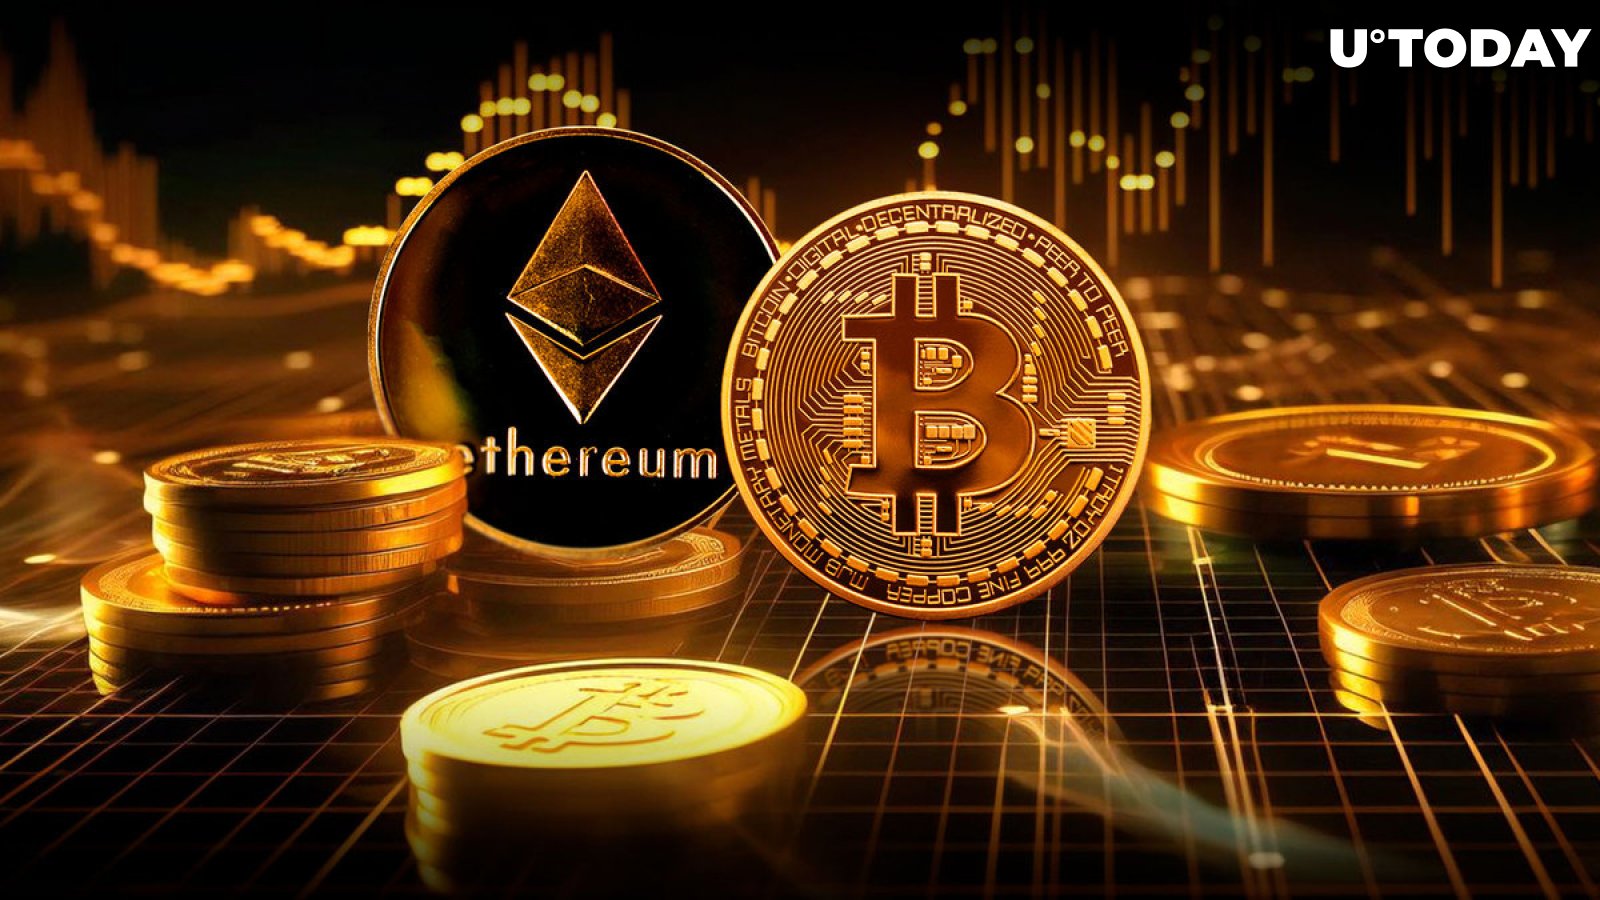 Ethereum (ETH) and Bitcoin (BTC) Prices Collapse After Stunning Rally